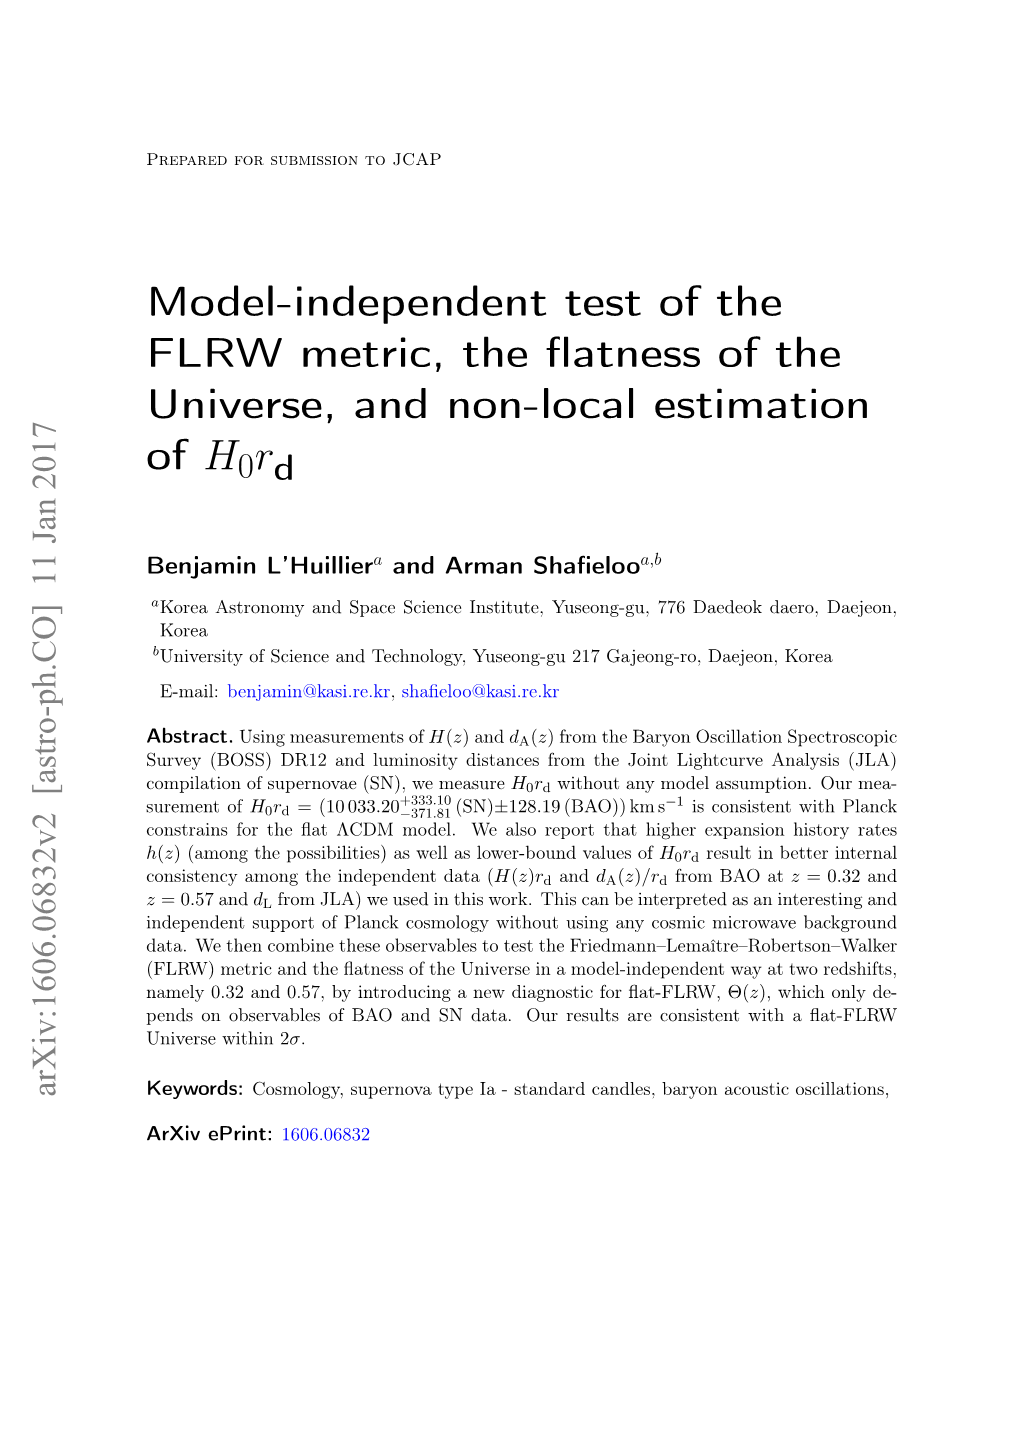 Model-Independent Test of the FLRW Metric, the Flatness of the Universe